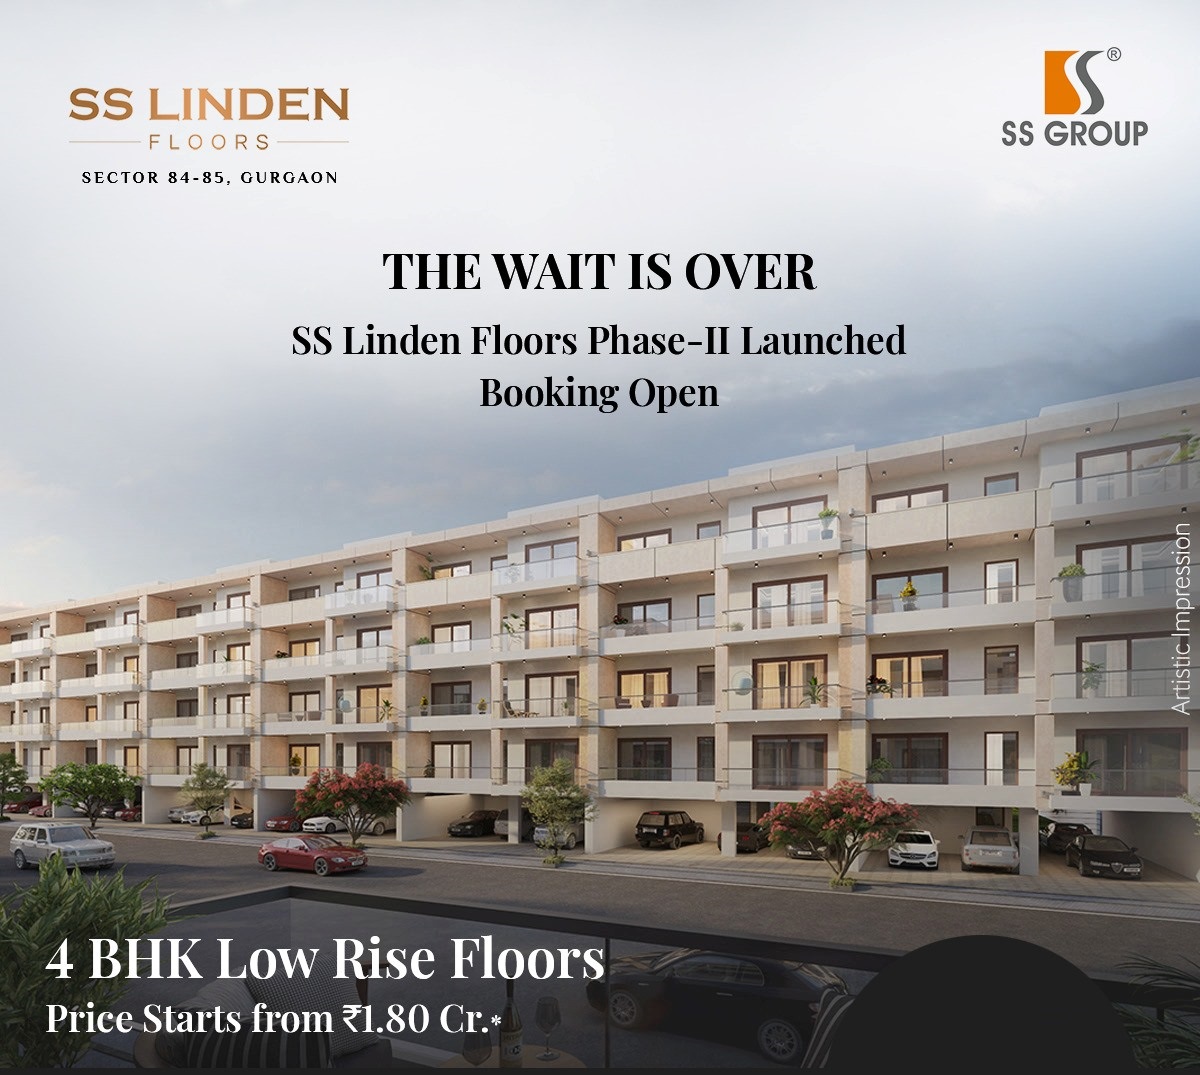 SS Linden Floors Phase 2 launched and booking open in Gurgaon Update